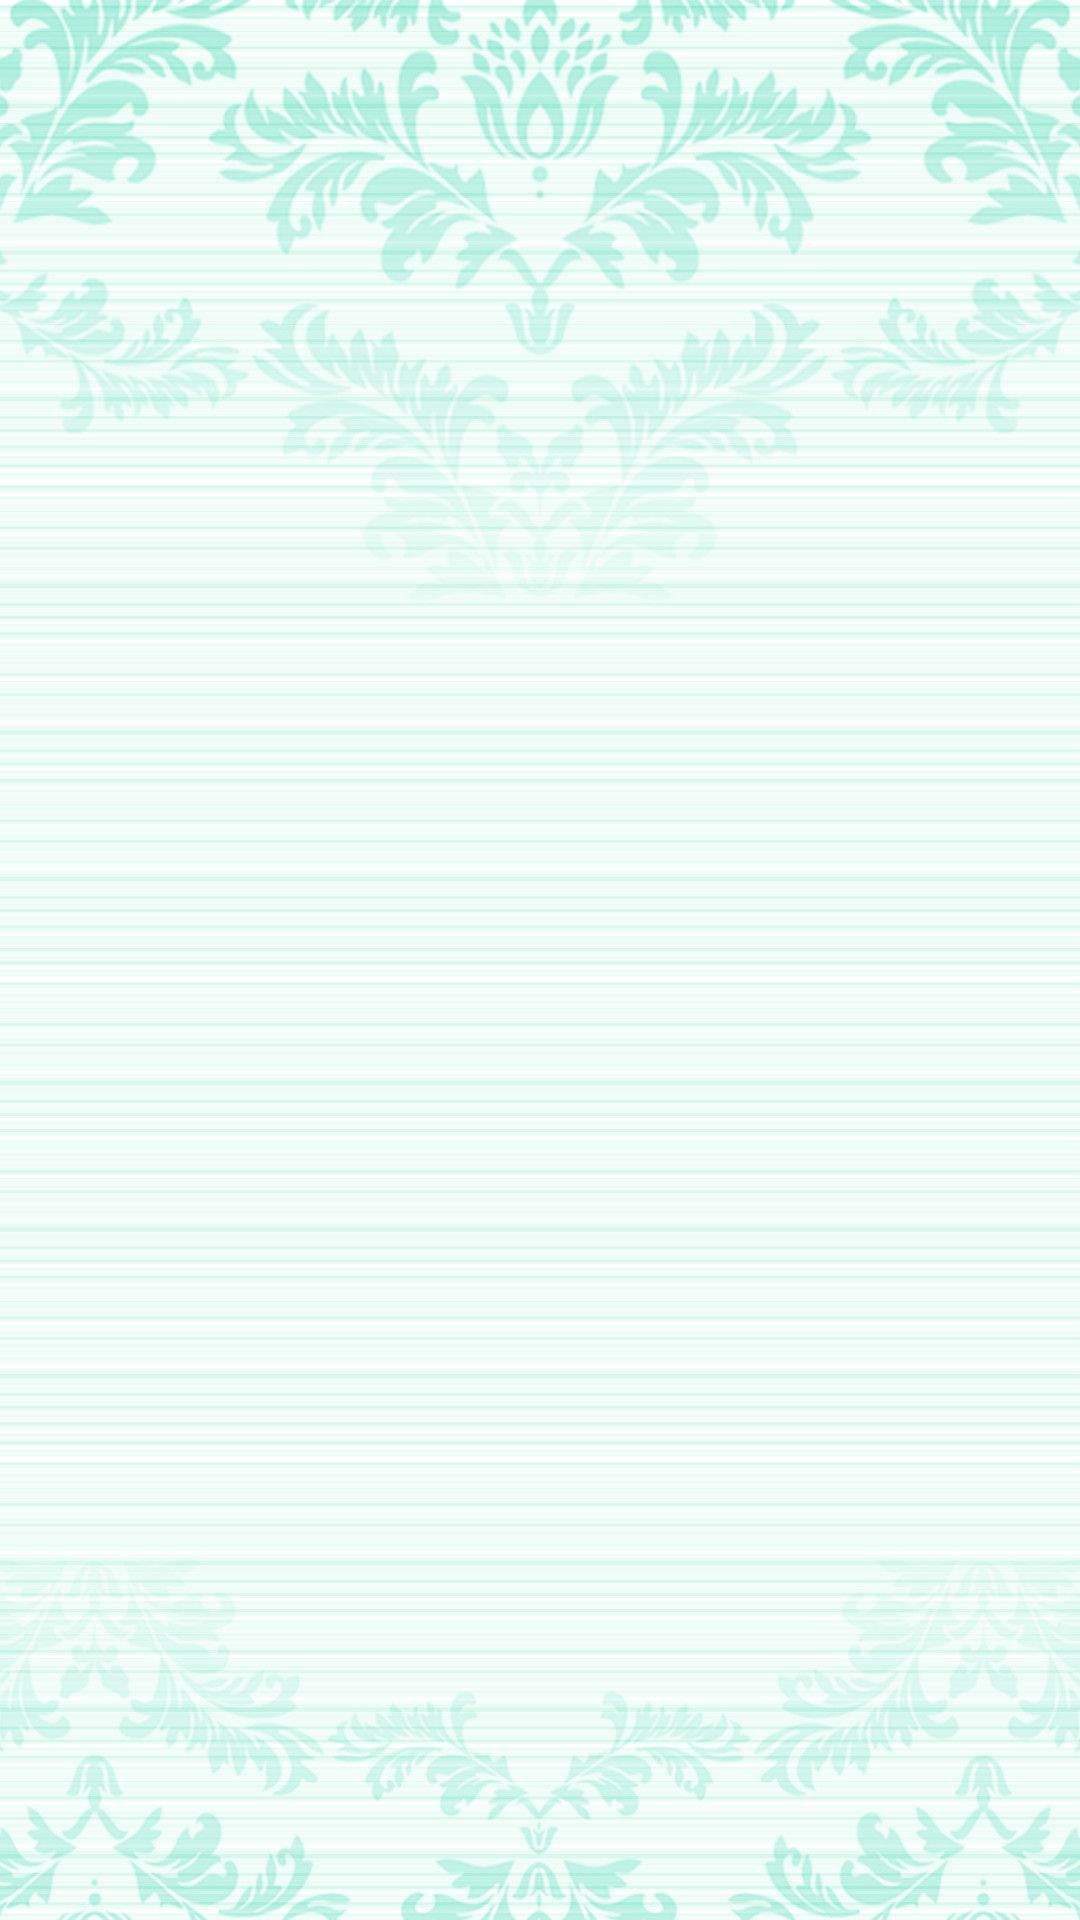 Pastel mint green ombre damask frame iPhone phone lock screen wallpaper background